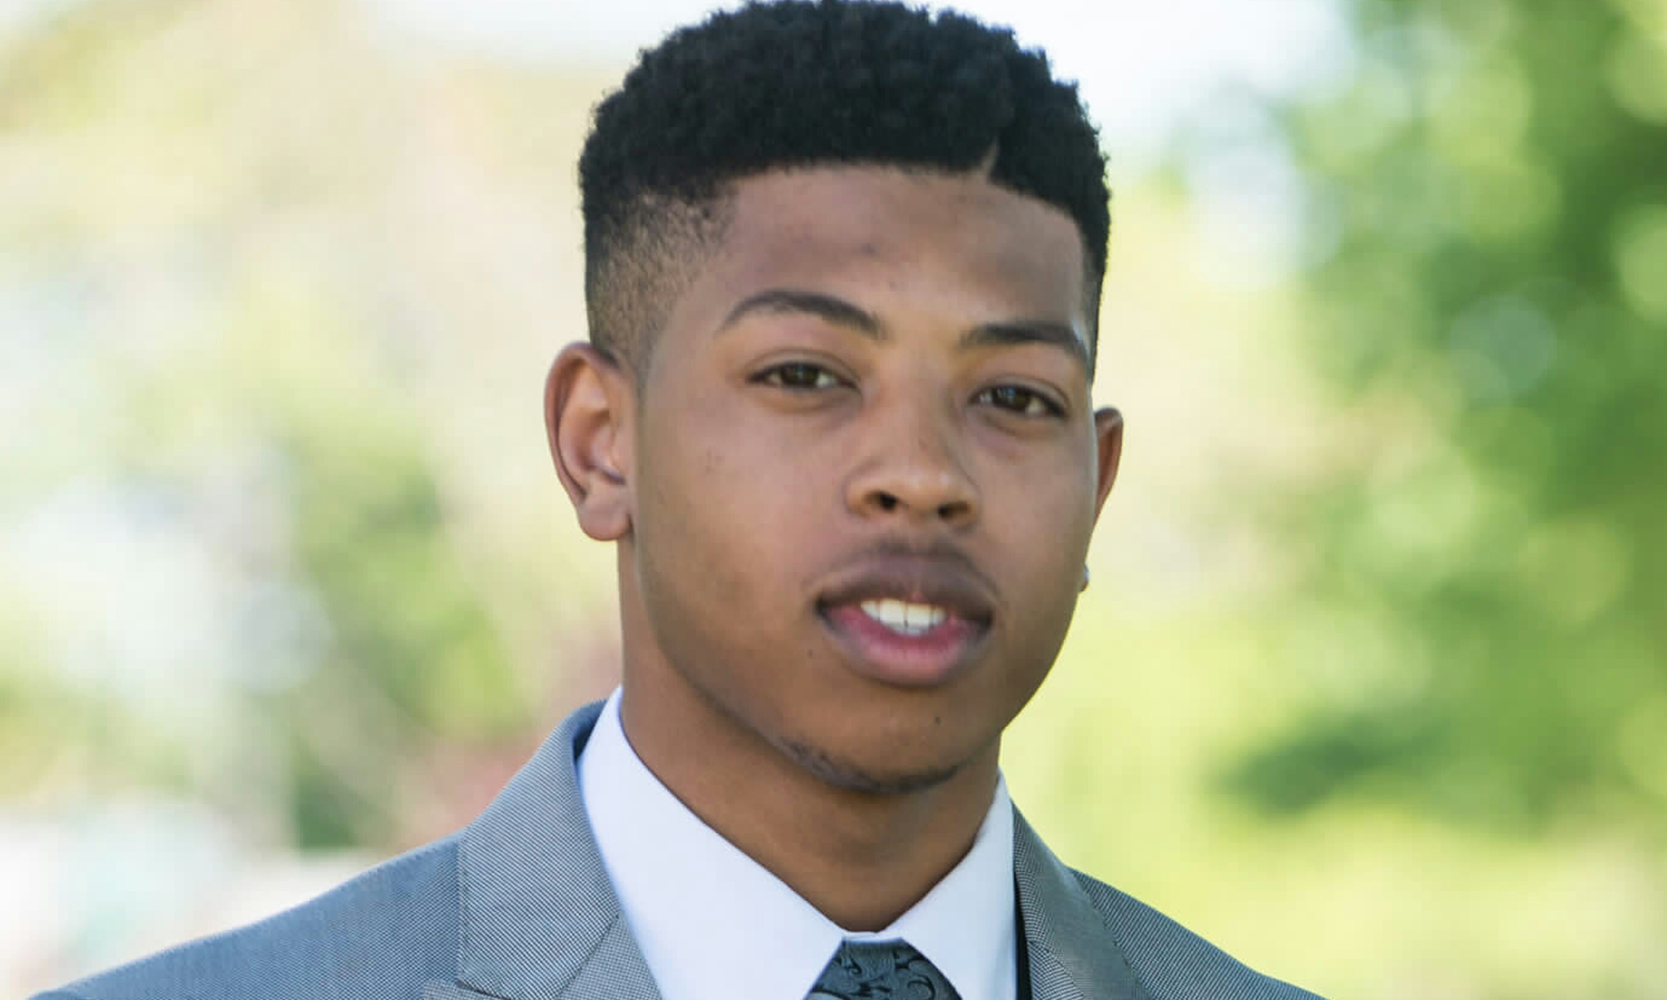 Jewell Jones is a young Black man with short, black, & faded hair and light facial hair. He is wearing a light blue suit jacket with a white button up and black tie.